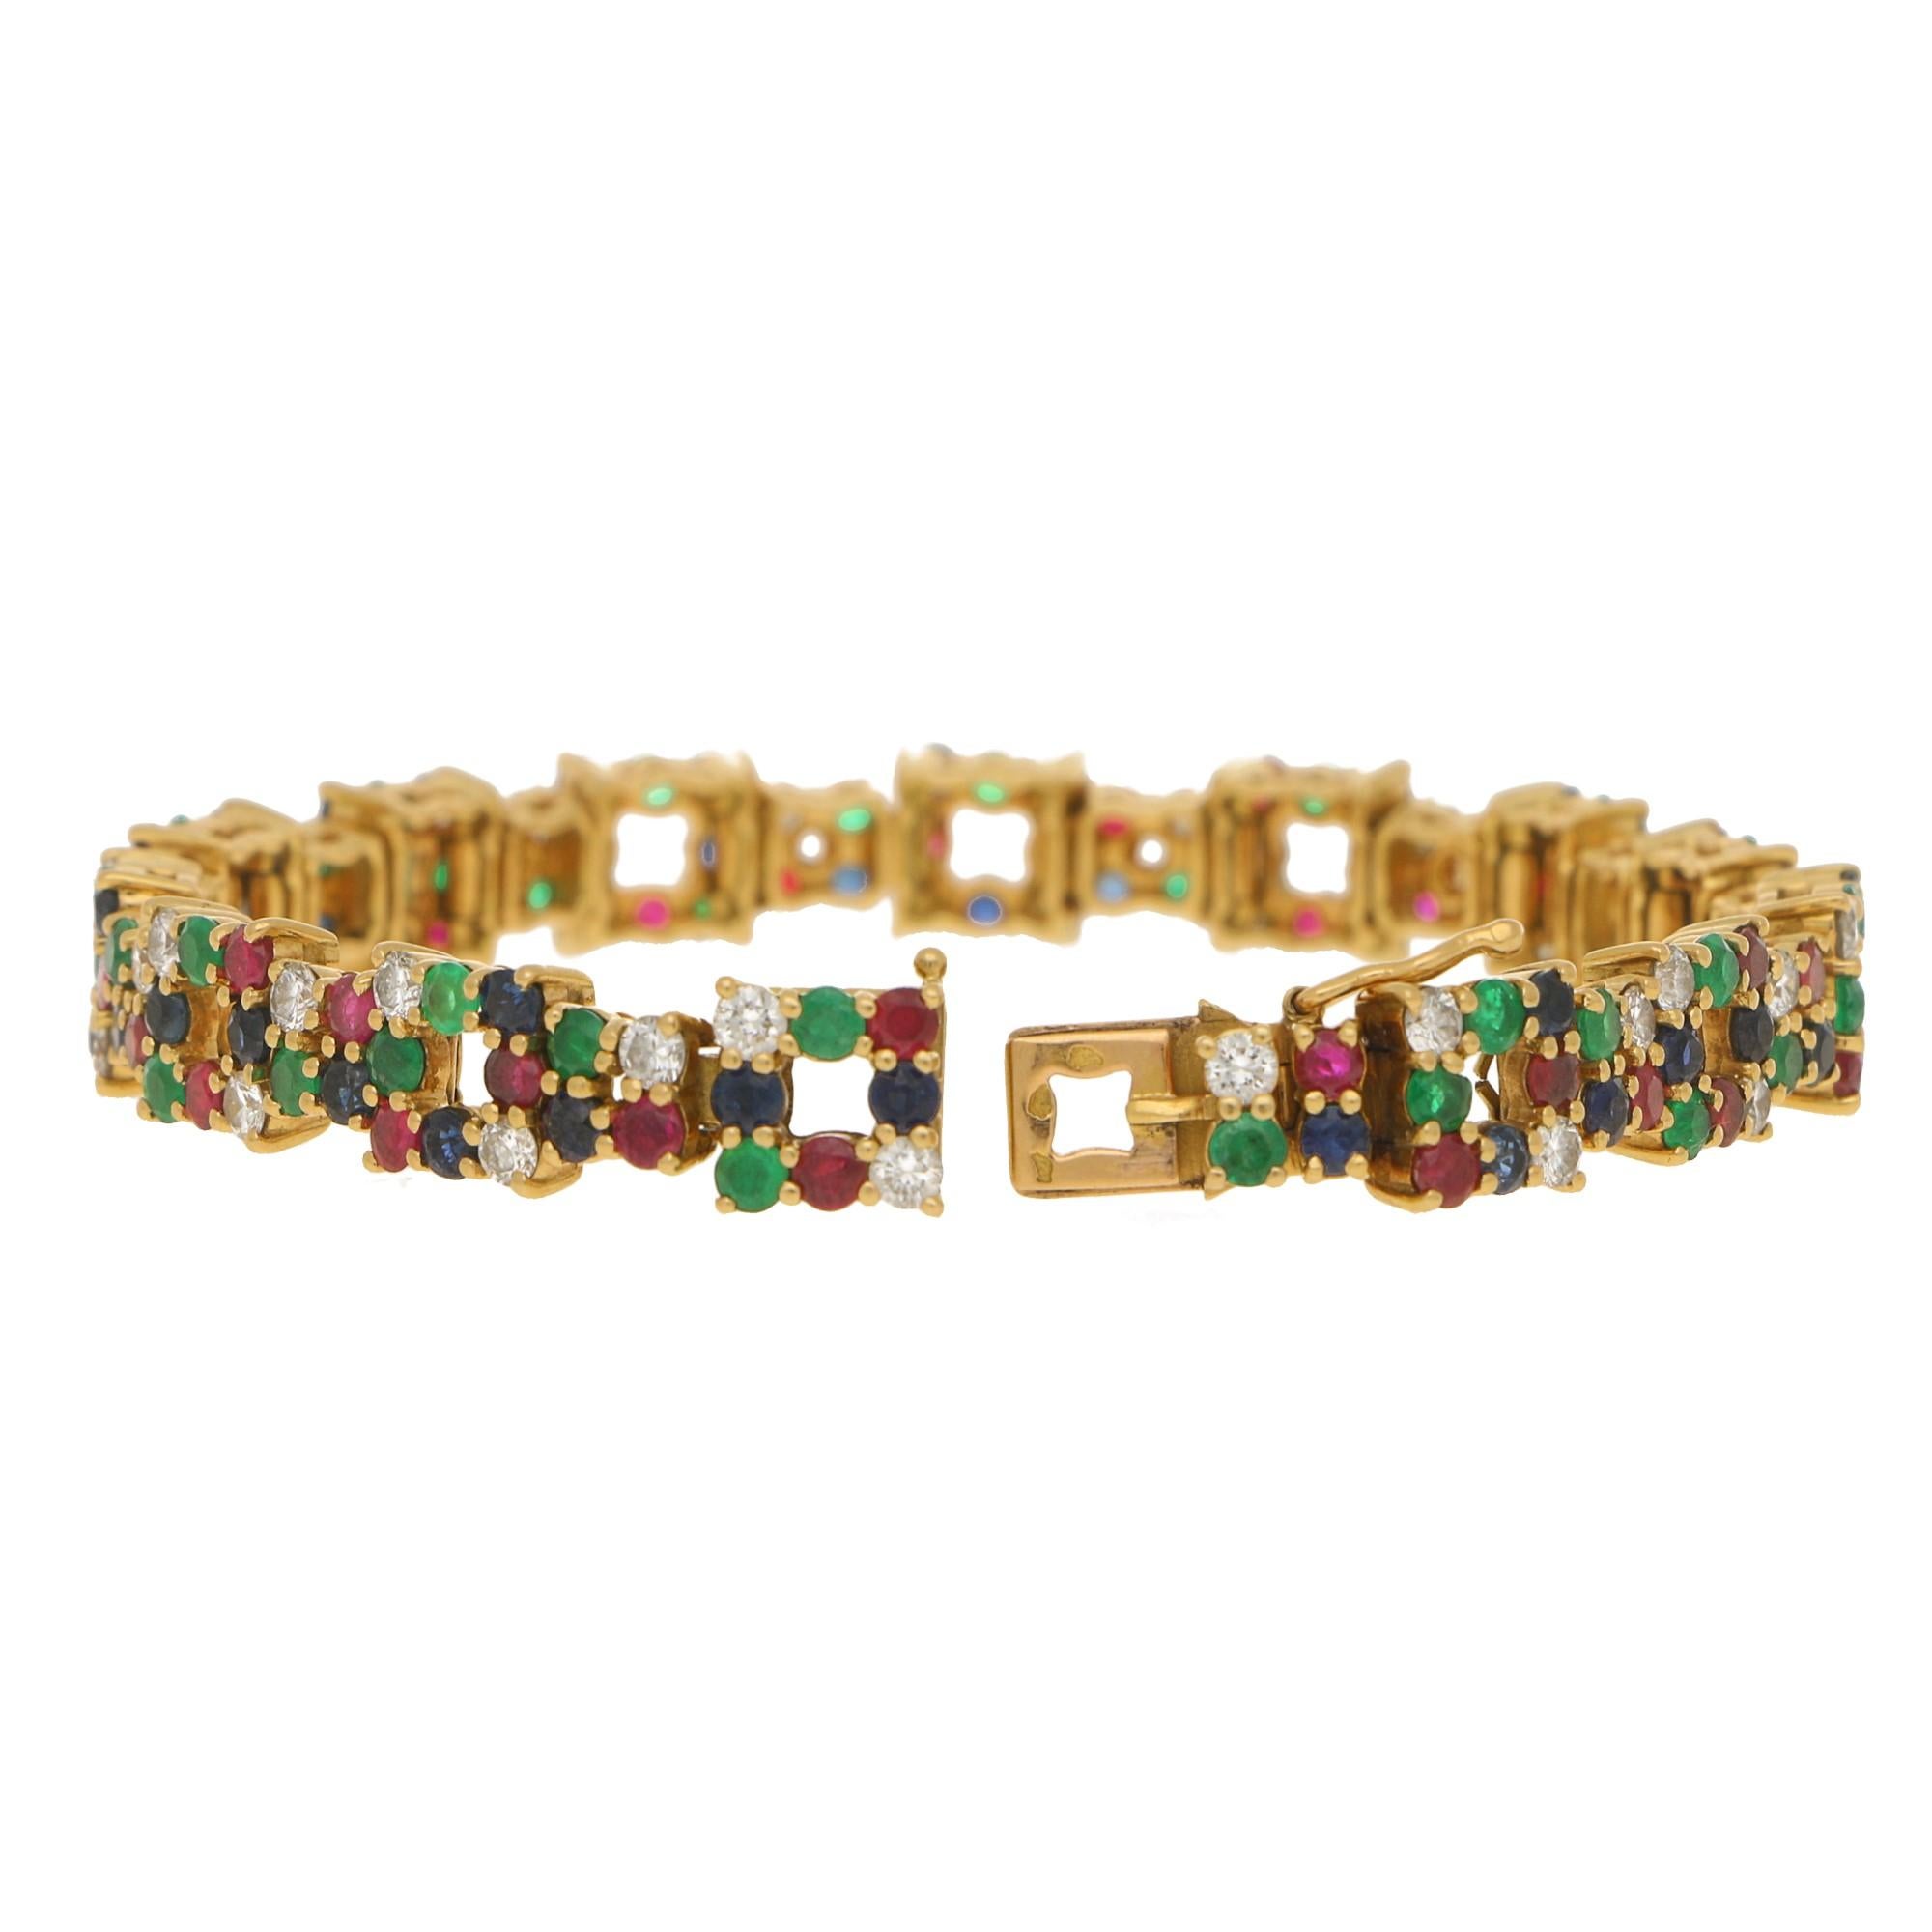 A beautiful ruby, emerald, sapphire and diamond bracelet set in 18k yellow gold, signed Boucheron.

The piece is comprised of 28 open square sections which are randomly yet equally set with round cut rubies. emeralds, sapphires and diamonds. This